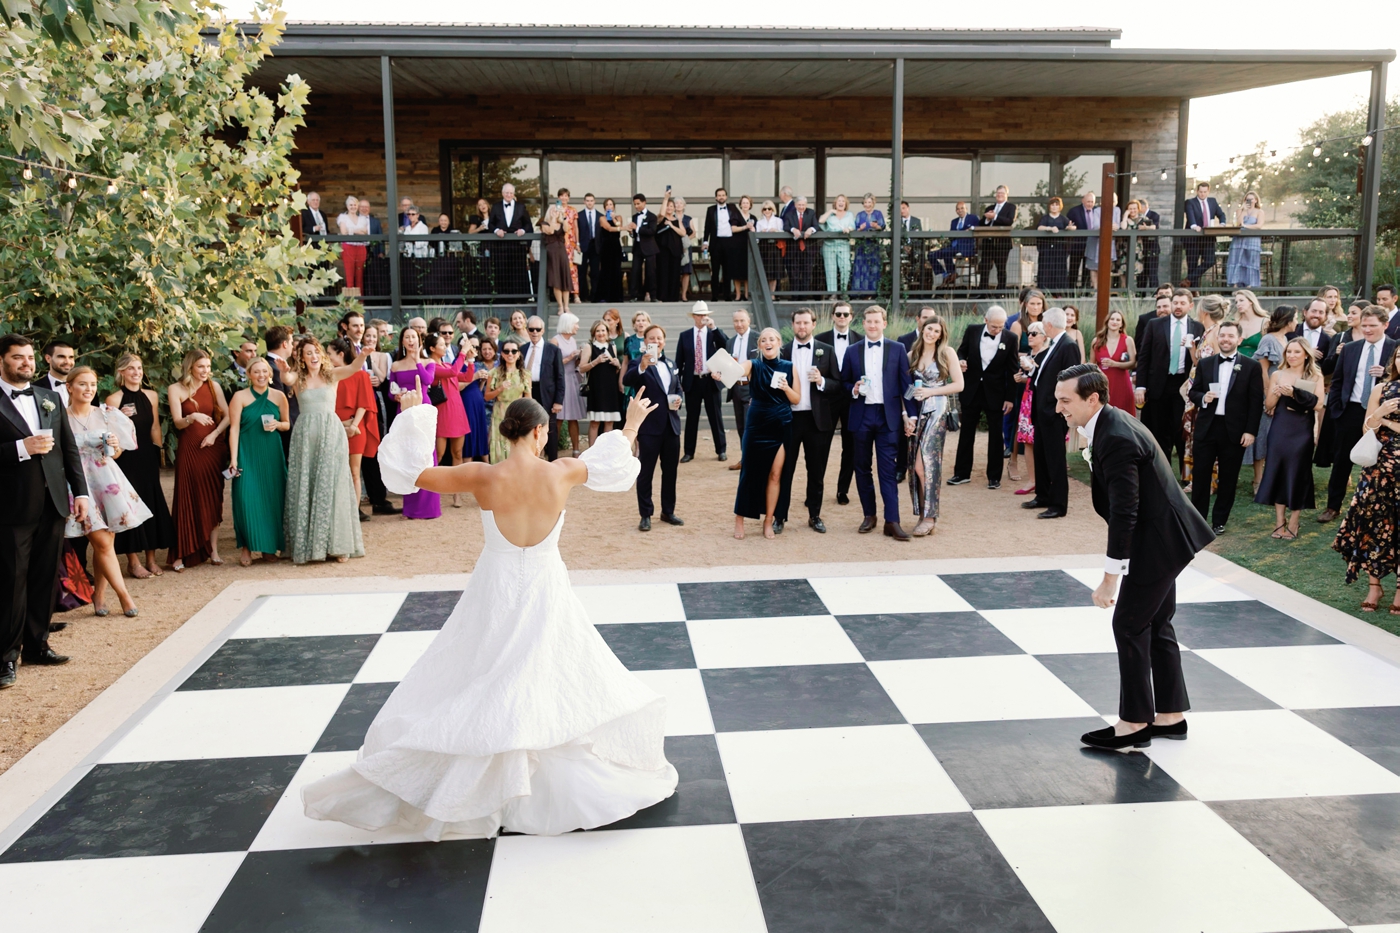 Bride and groom first dance on a checkered dance floor